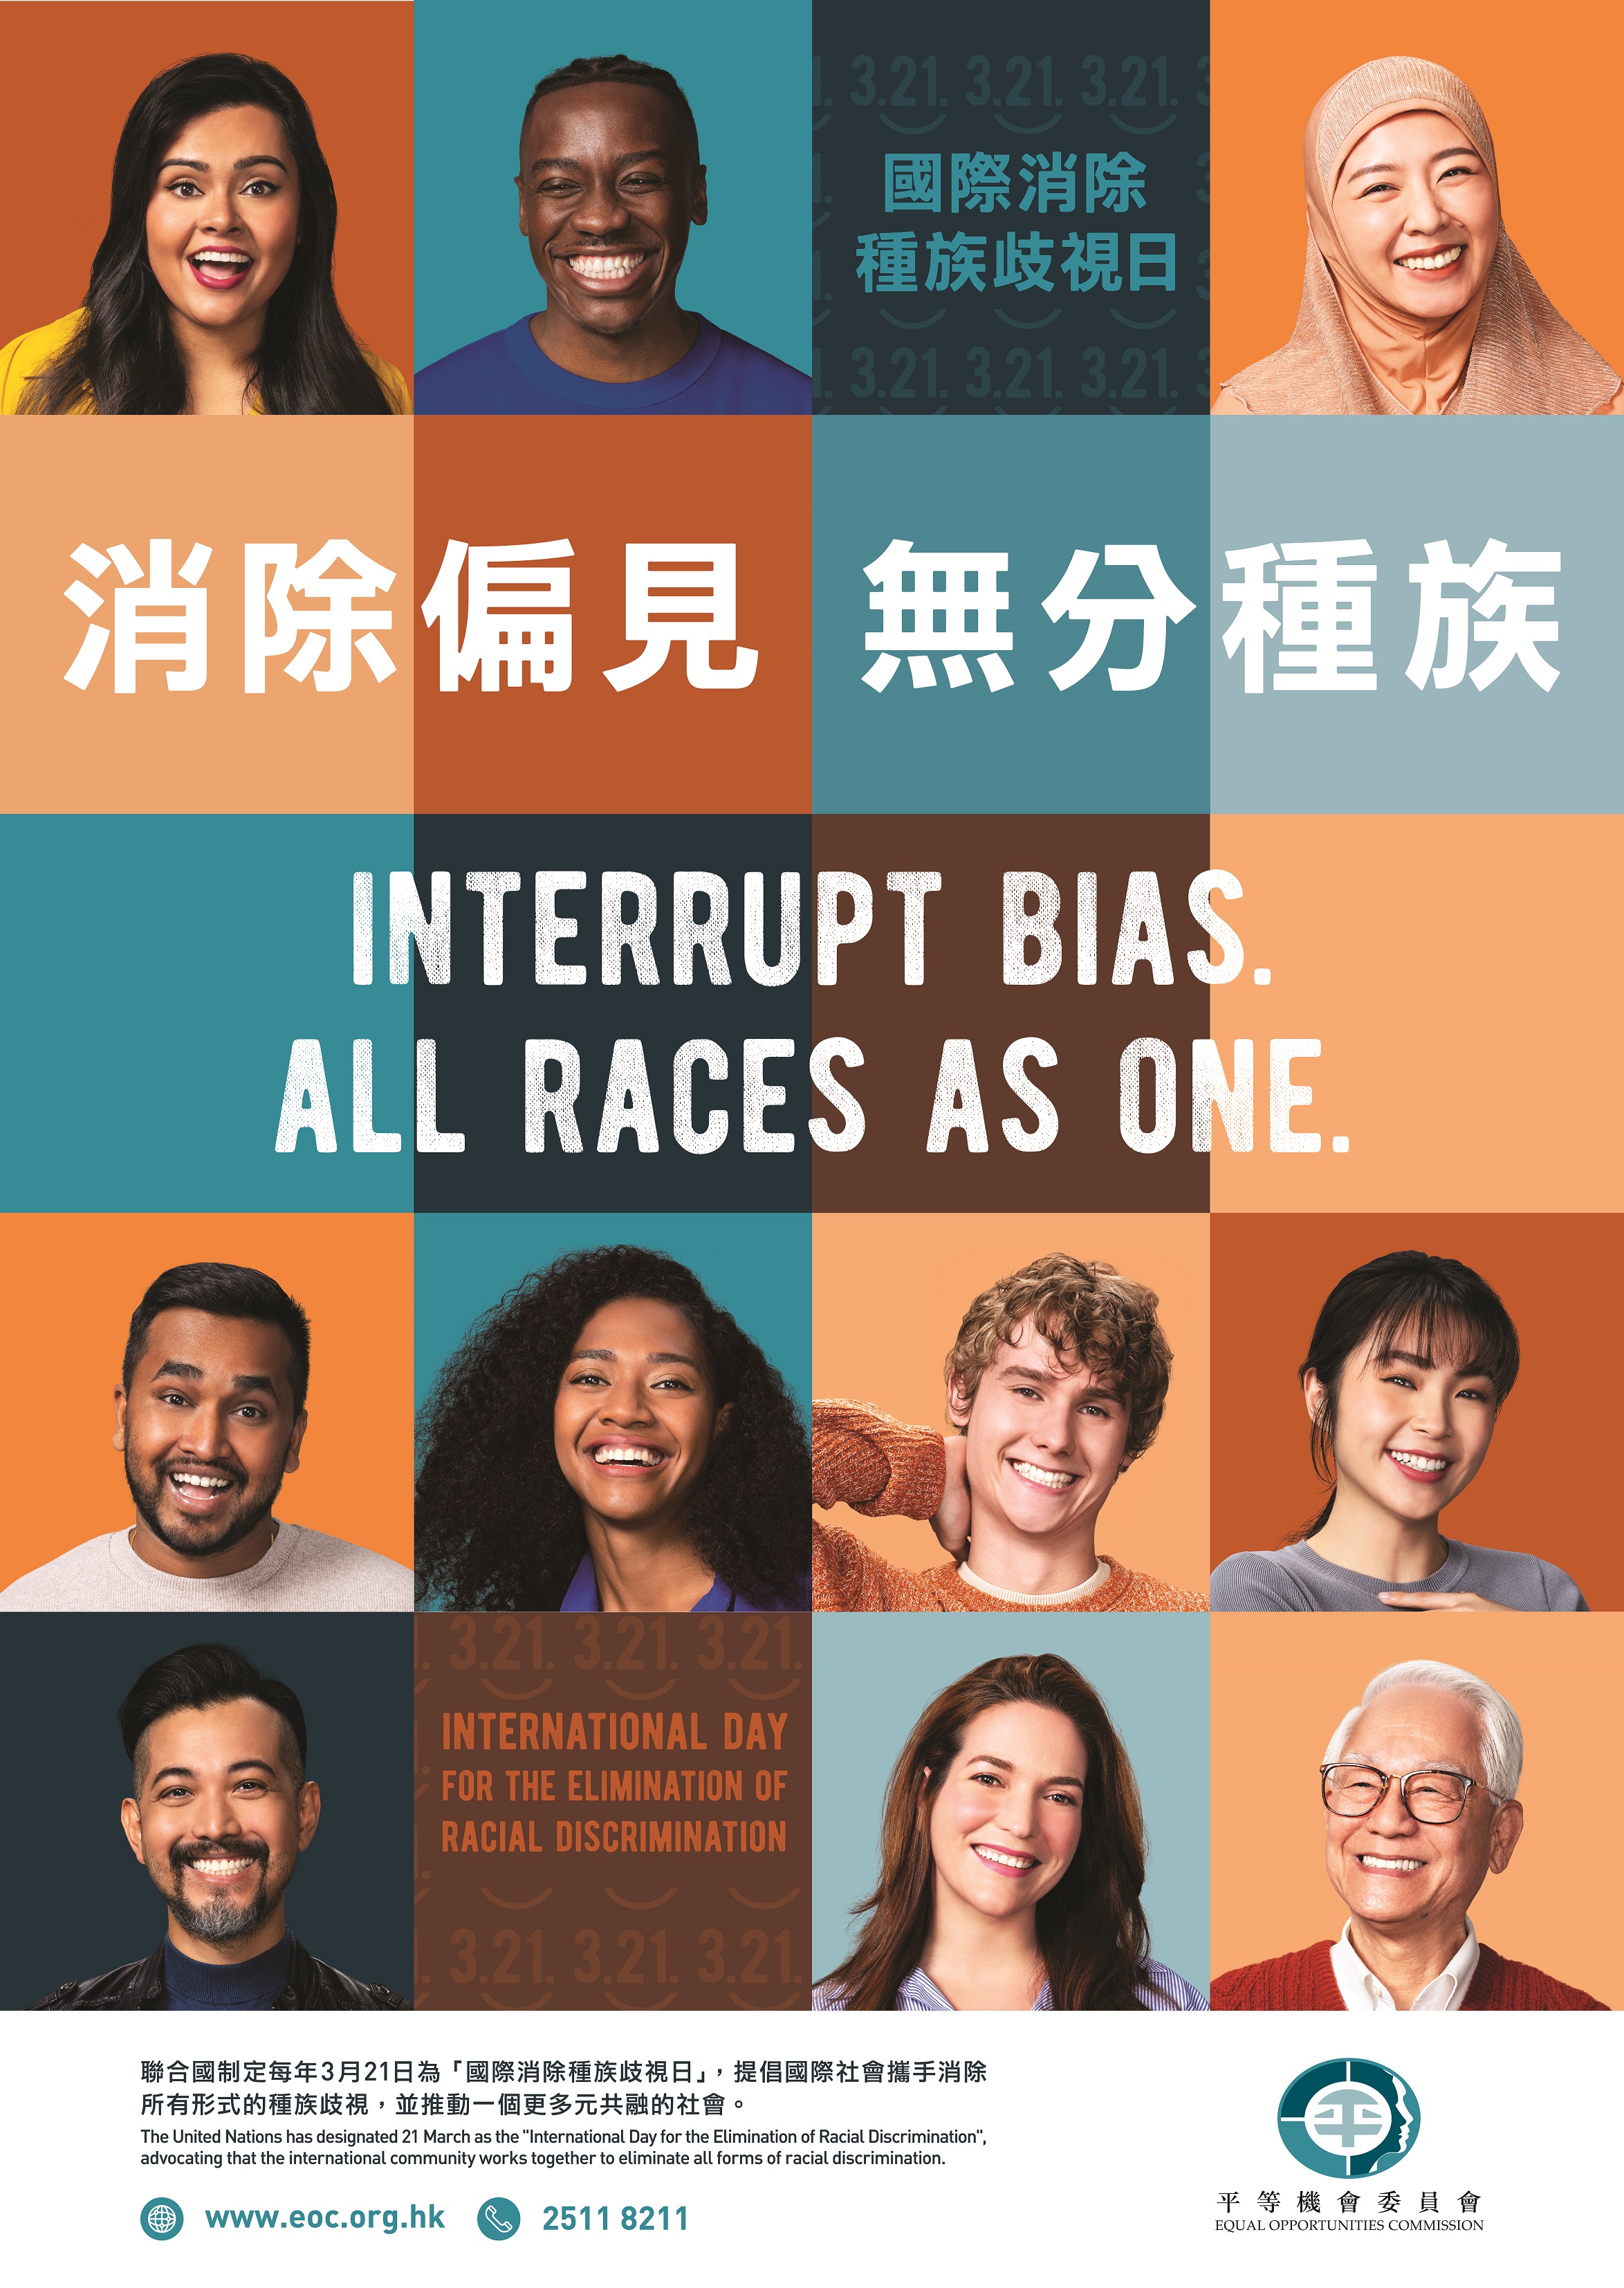 The EOC’s “All Races as One” poster is displayed by schools that have joined the Racially Friendly Campus Recognition Scheme to promote racial inclusion.